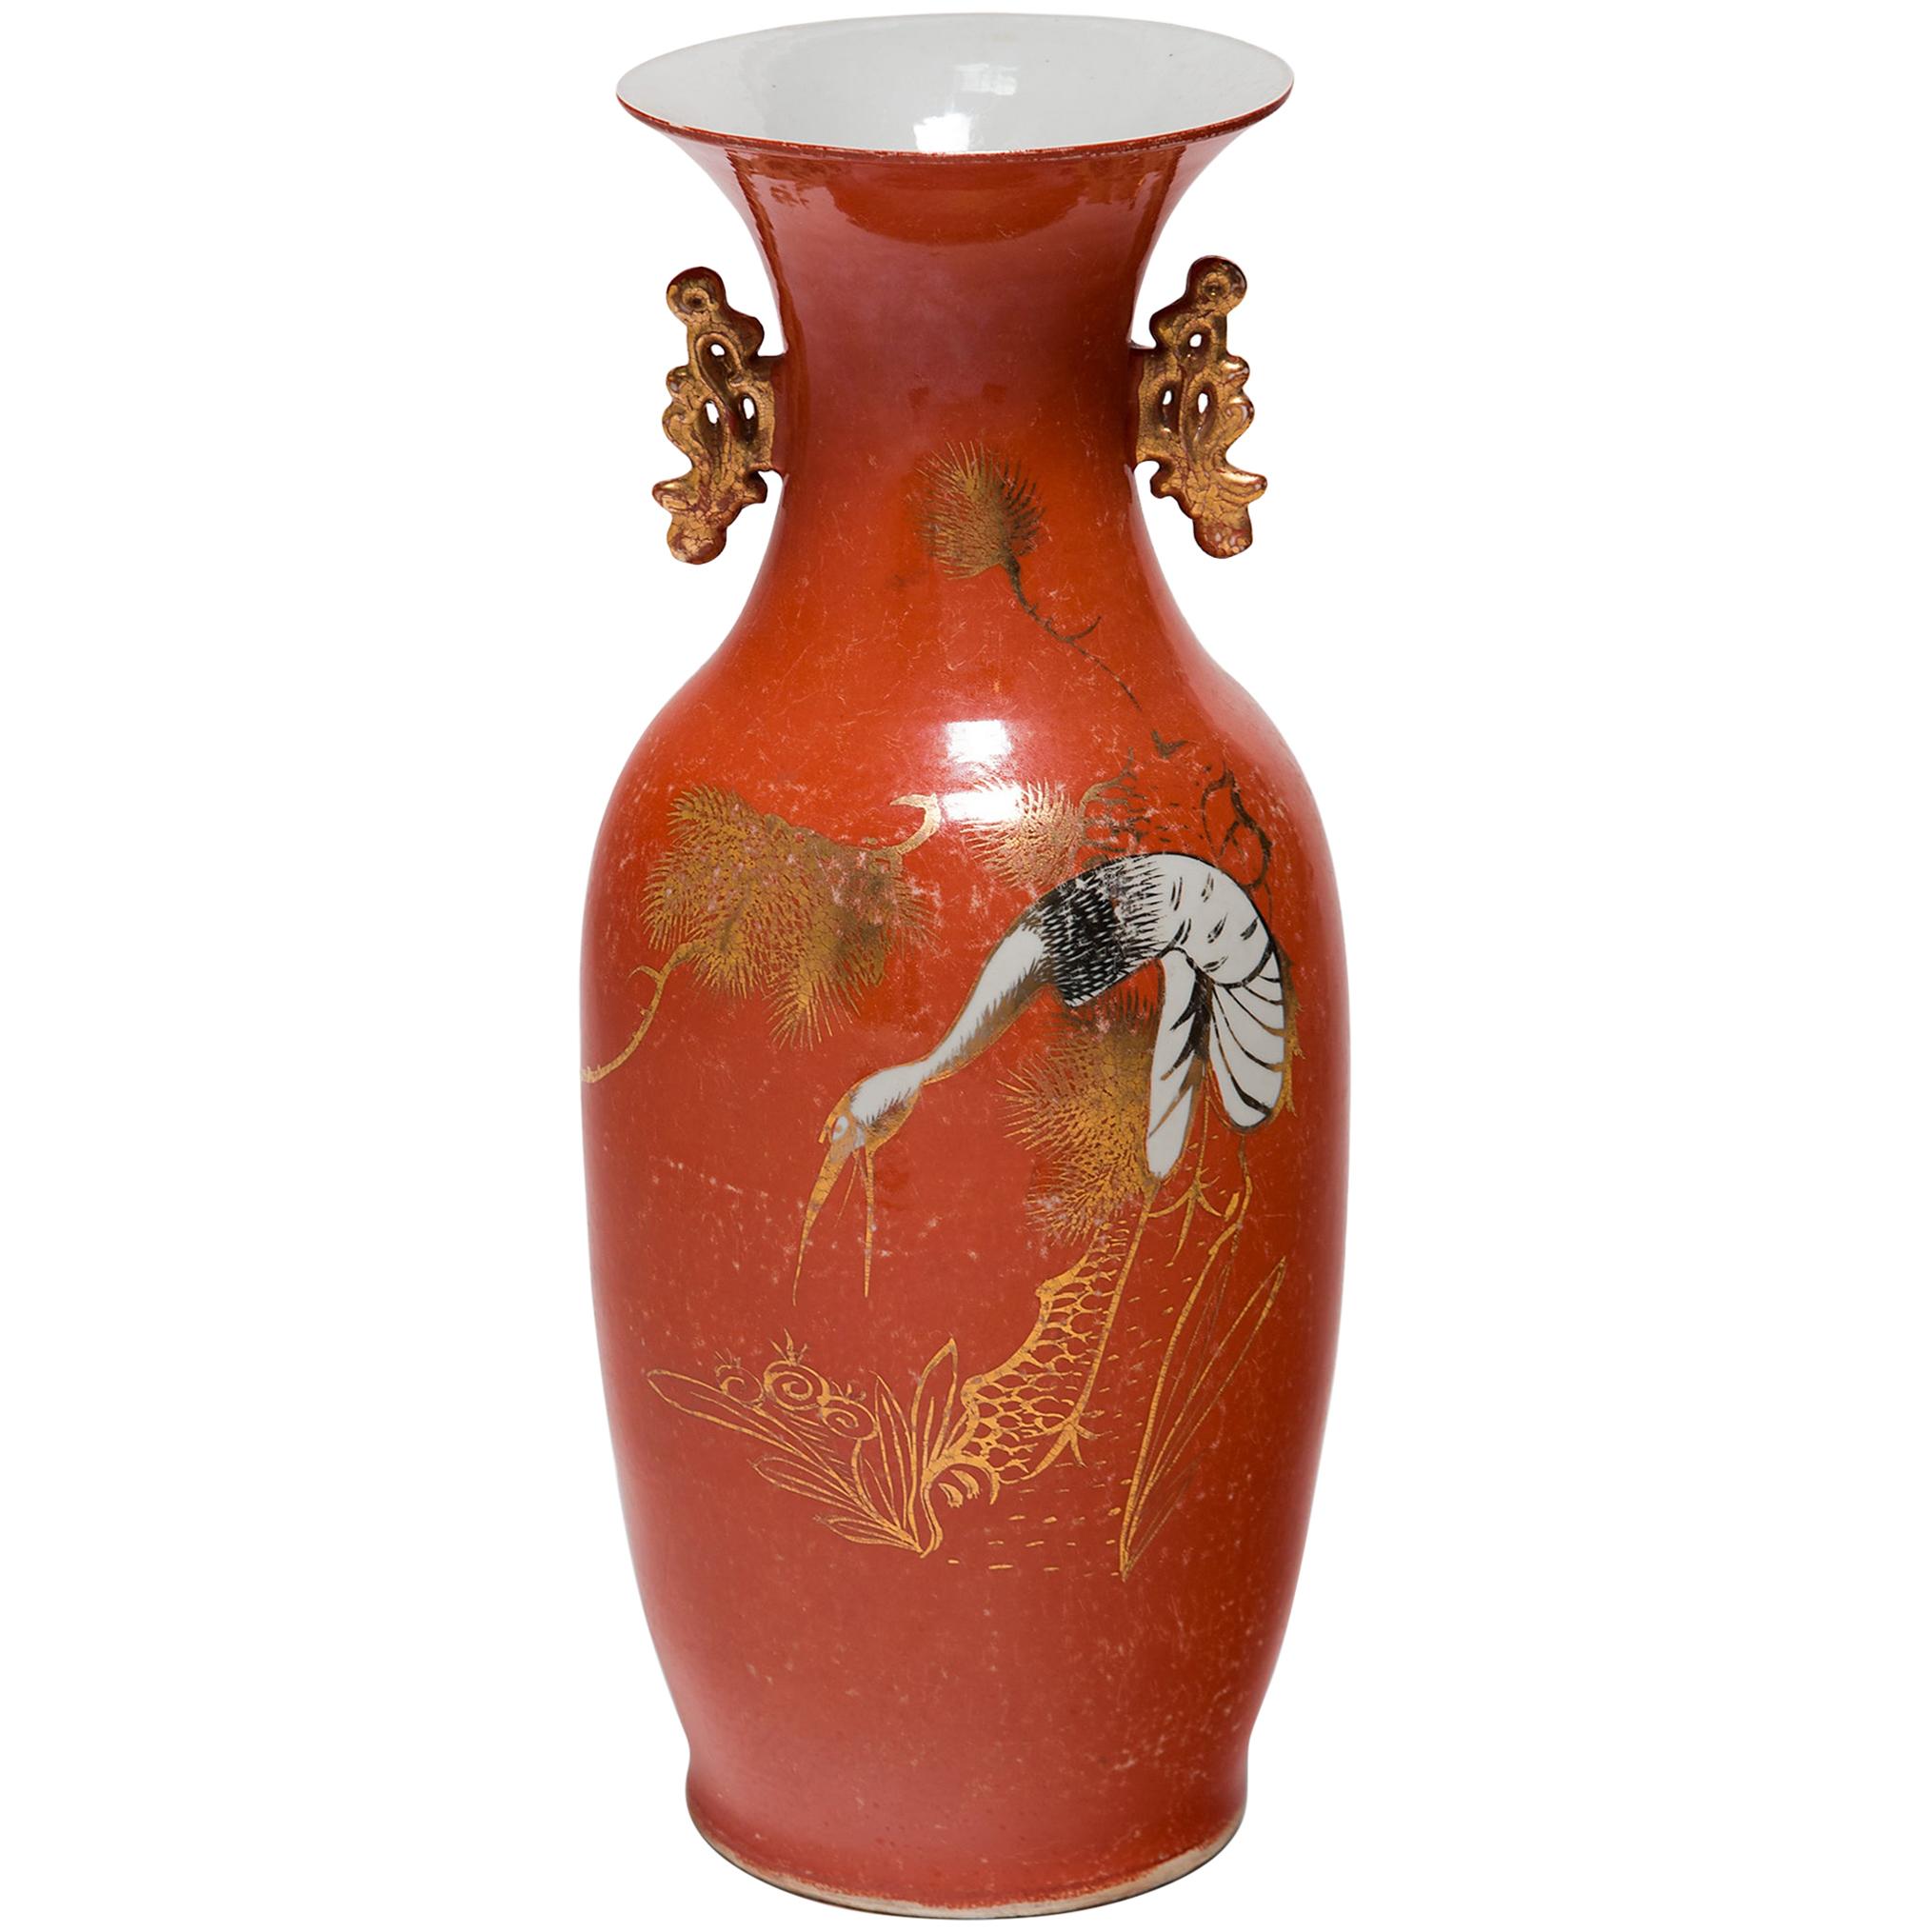 Chinese Art Deco Persimmon Vase with White Cranes, circa 1920s For Sale